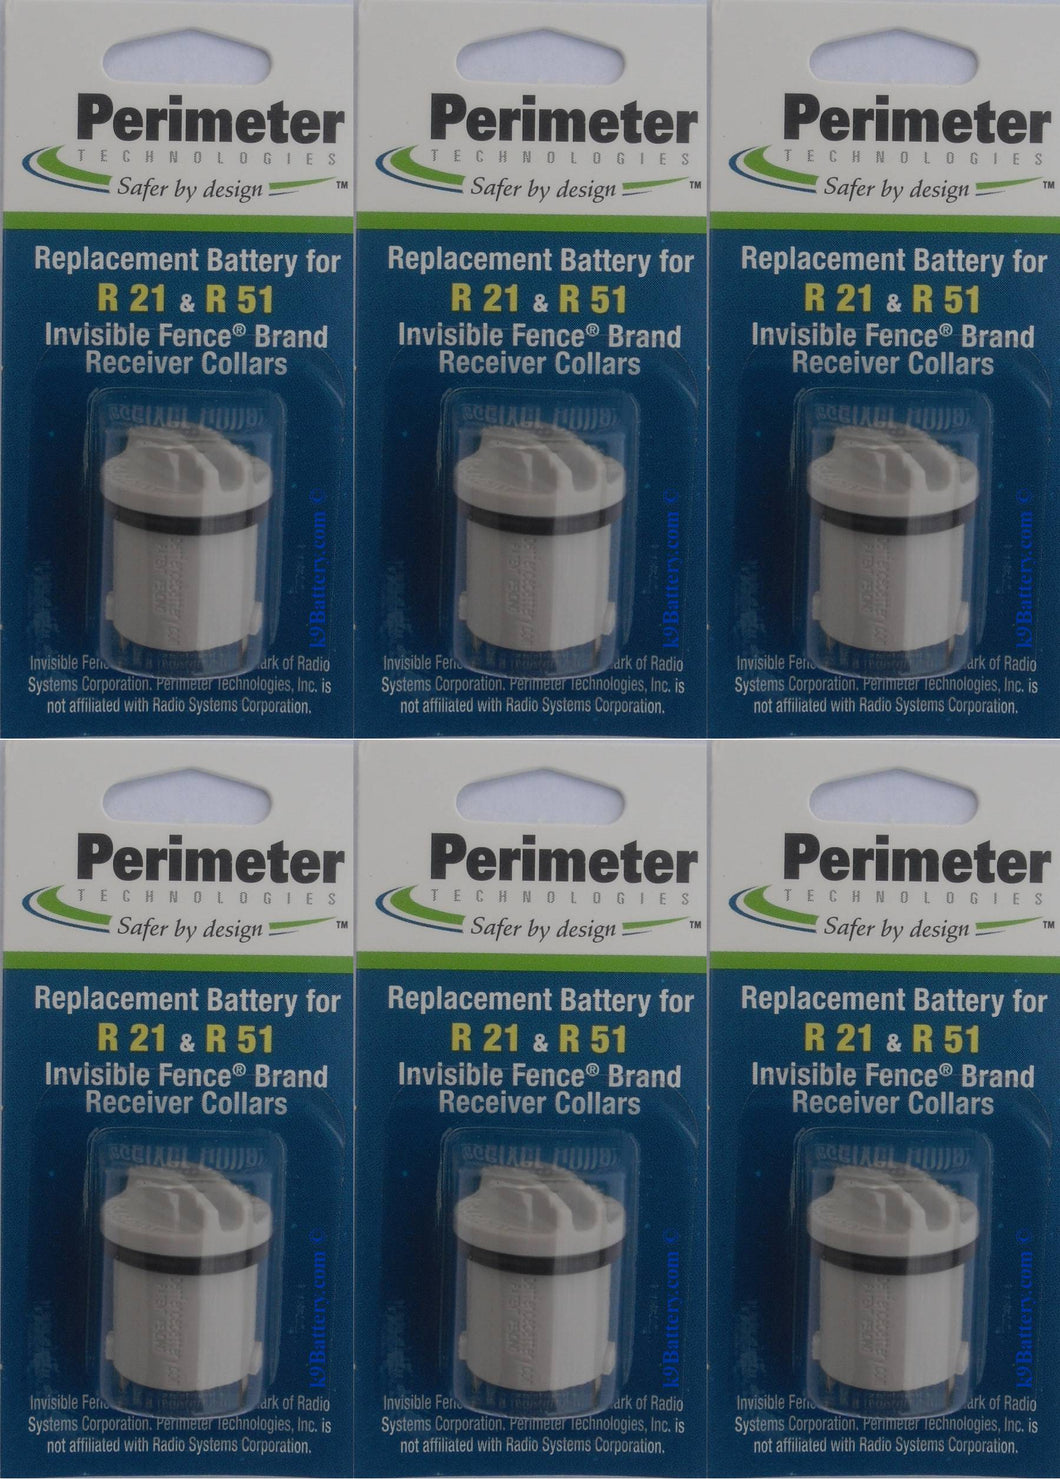  INVISIBLE FENCE BRAND Power Cap Batteries for